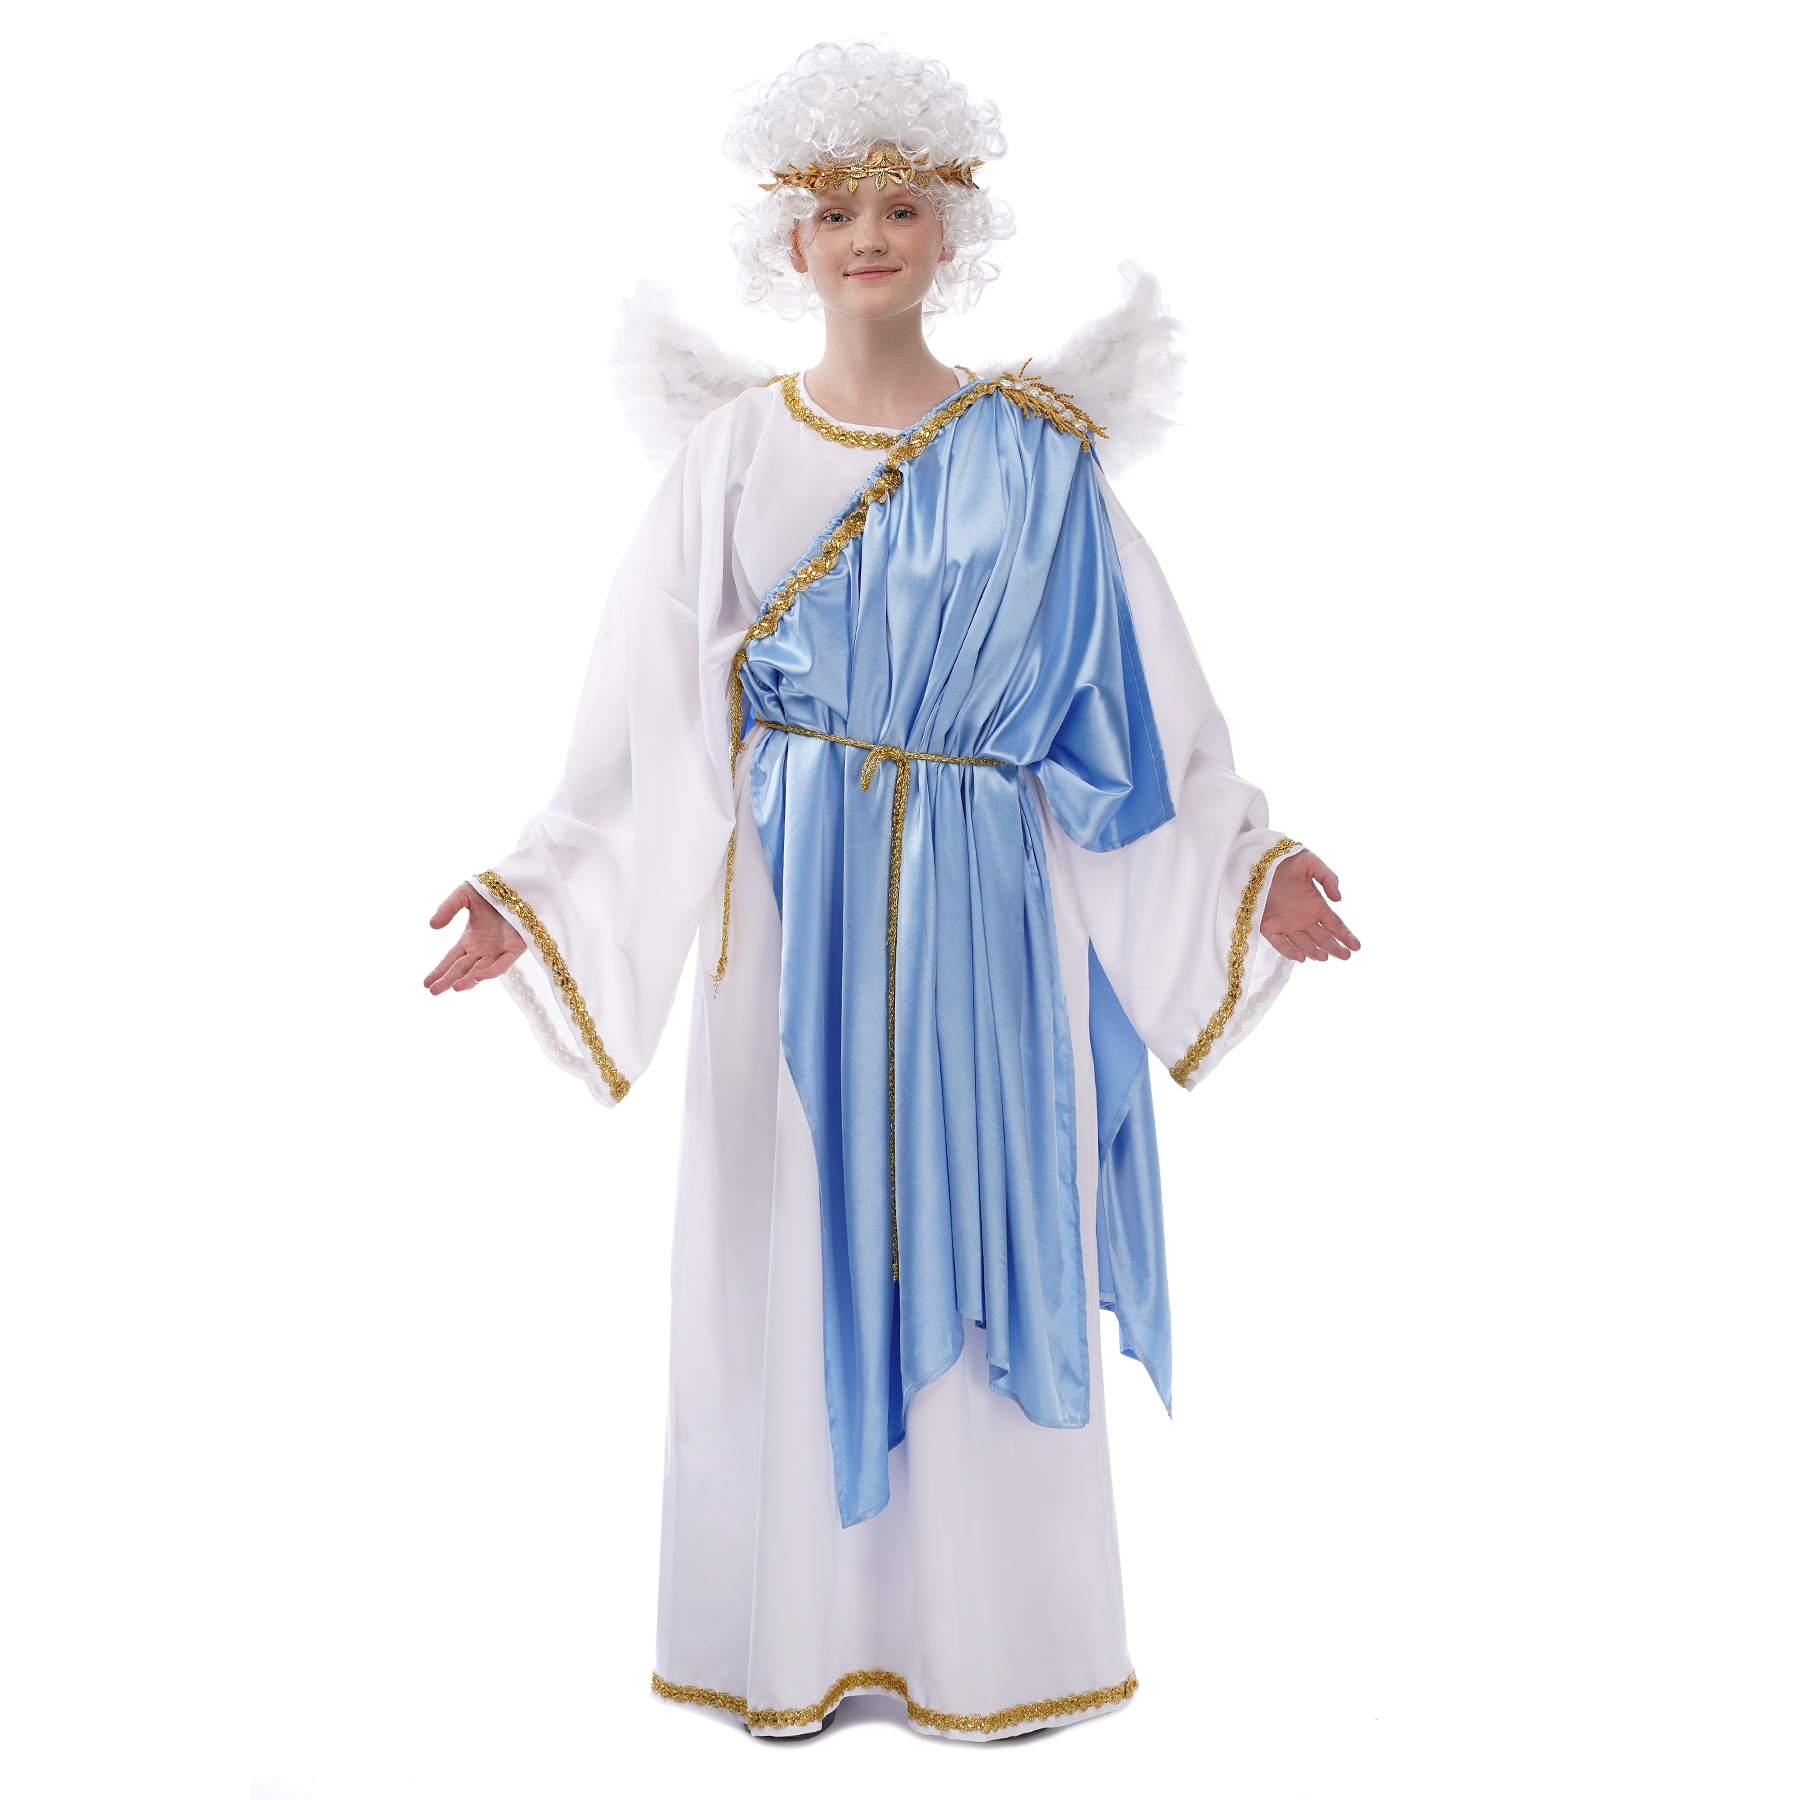 Angel costume (shipping to the USA only)